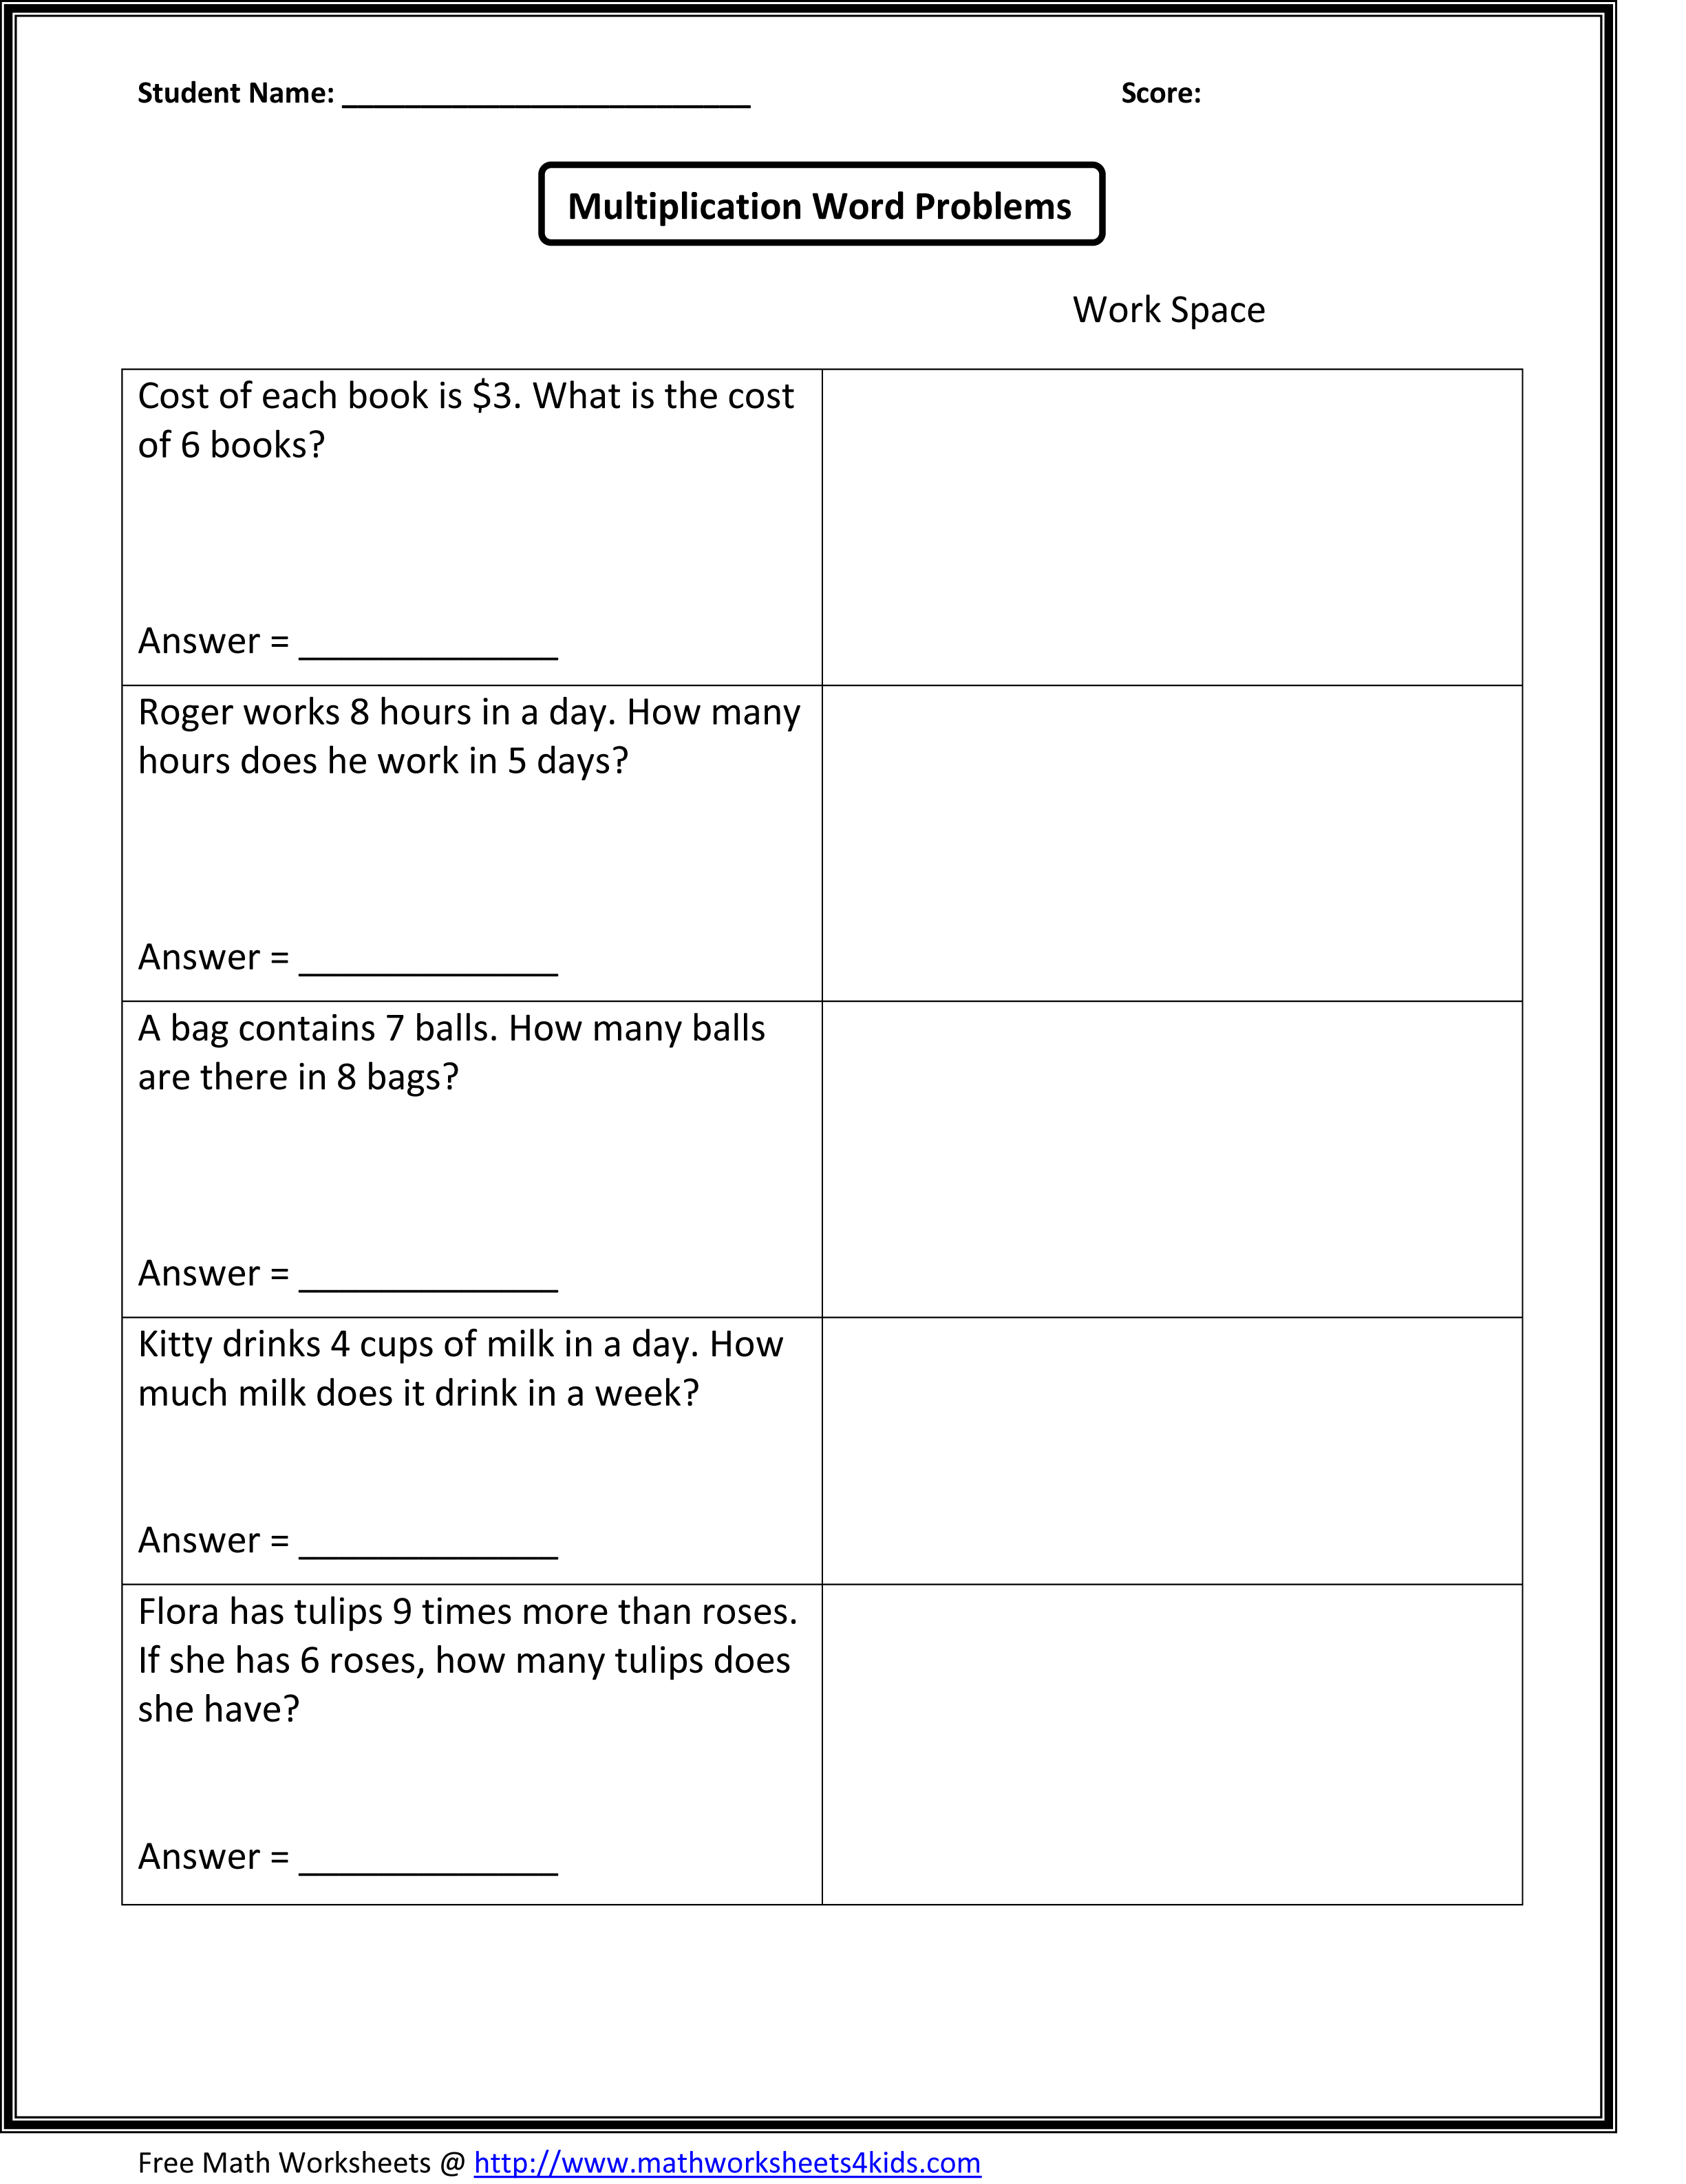 13 Best Images of Angles Word Problems Worksheets - 2nd ...